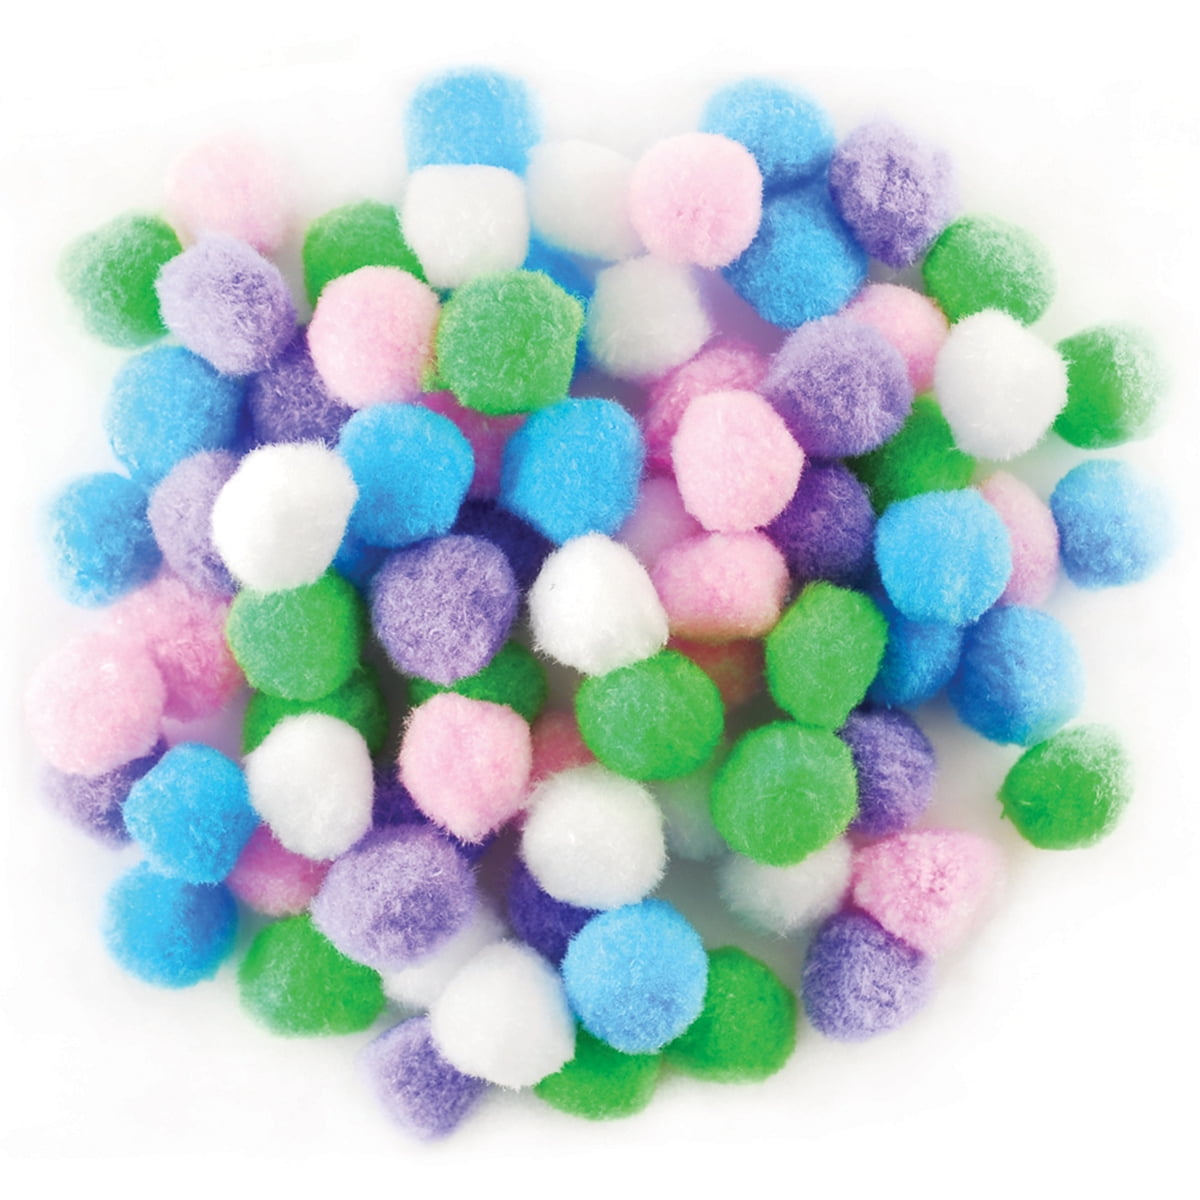 Pastel Pipe Cleaners and Poms Craft Pack 80 Pieces